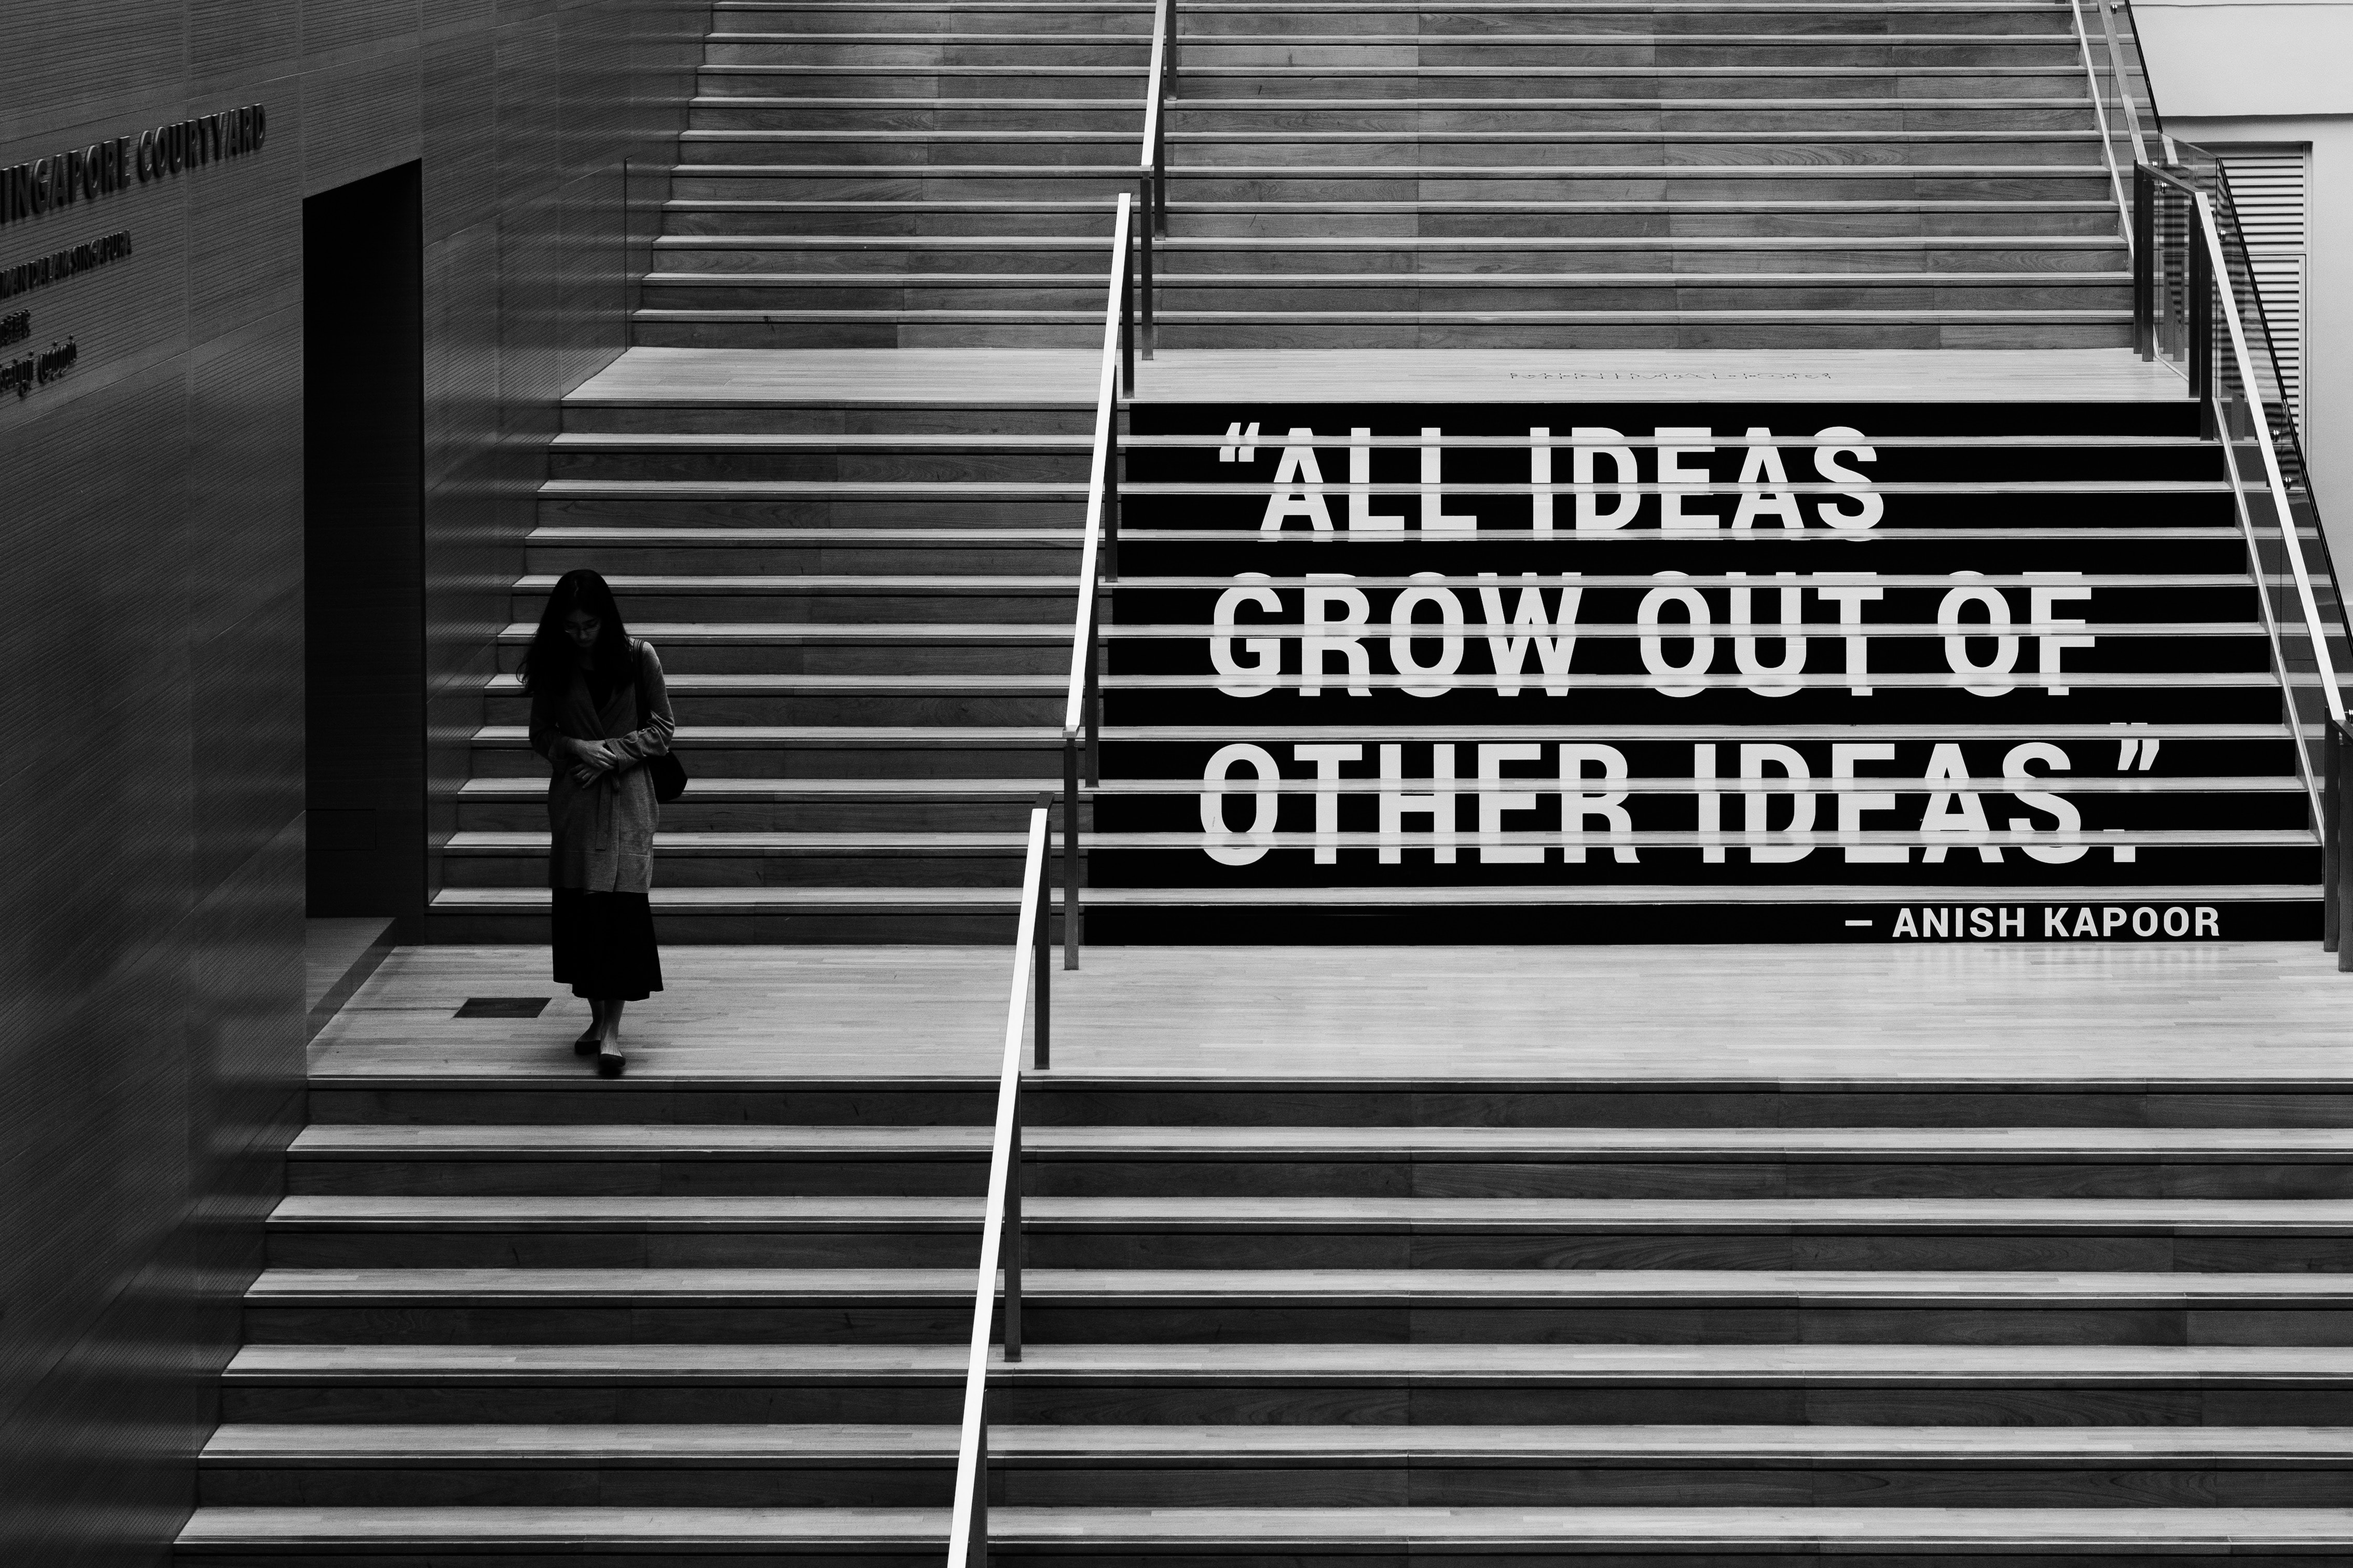 Decorative, "all ideas grow out of other ideas" quotation on staircase